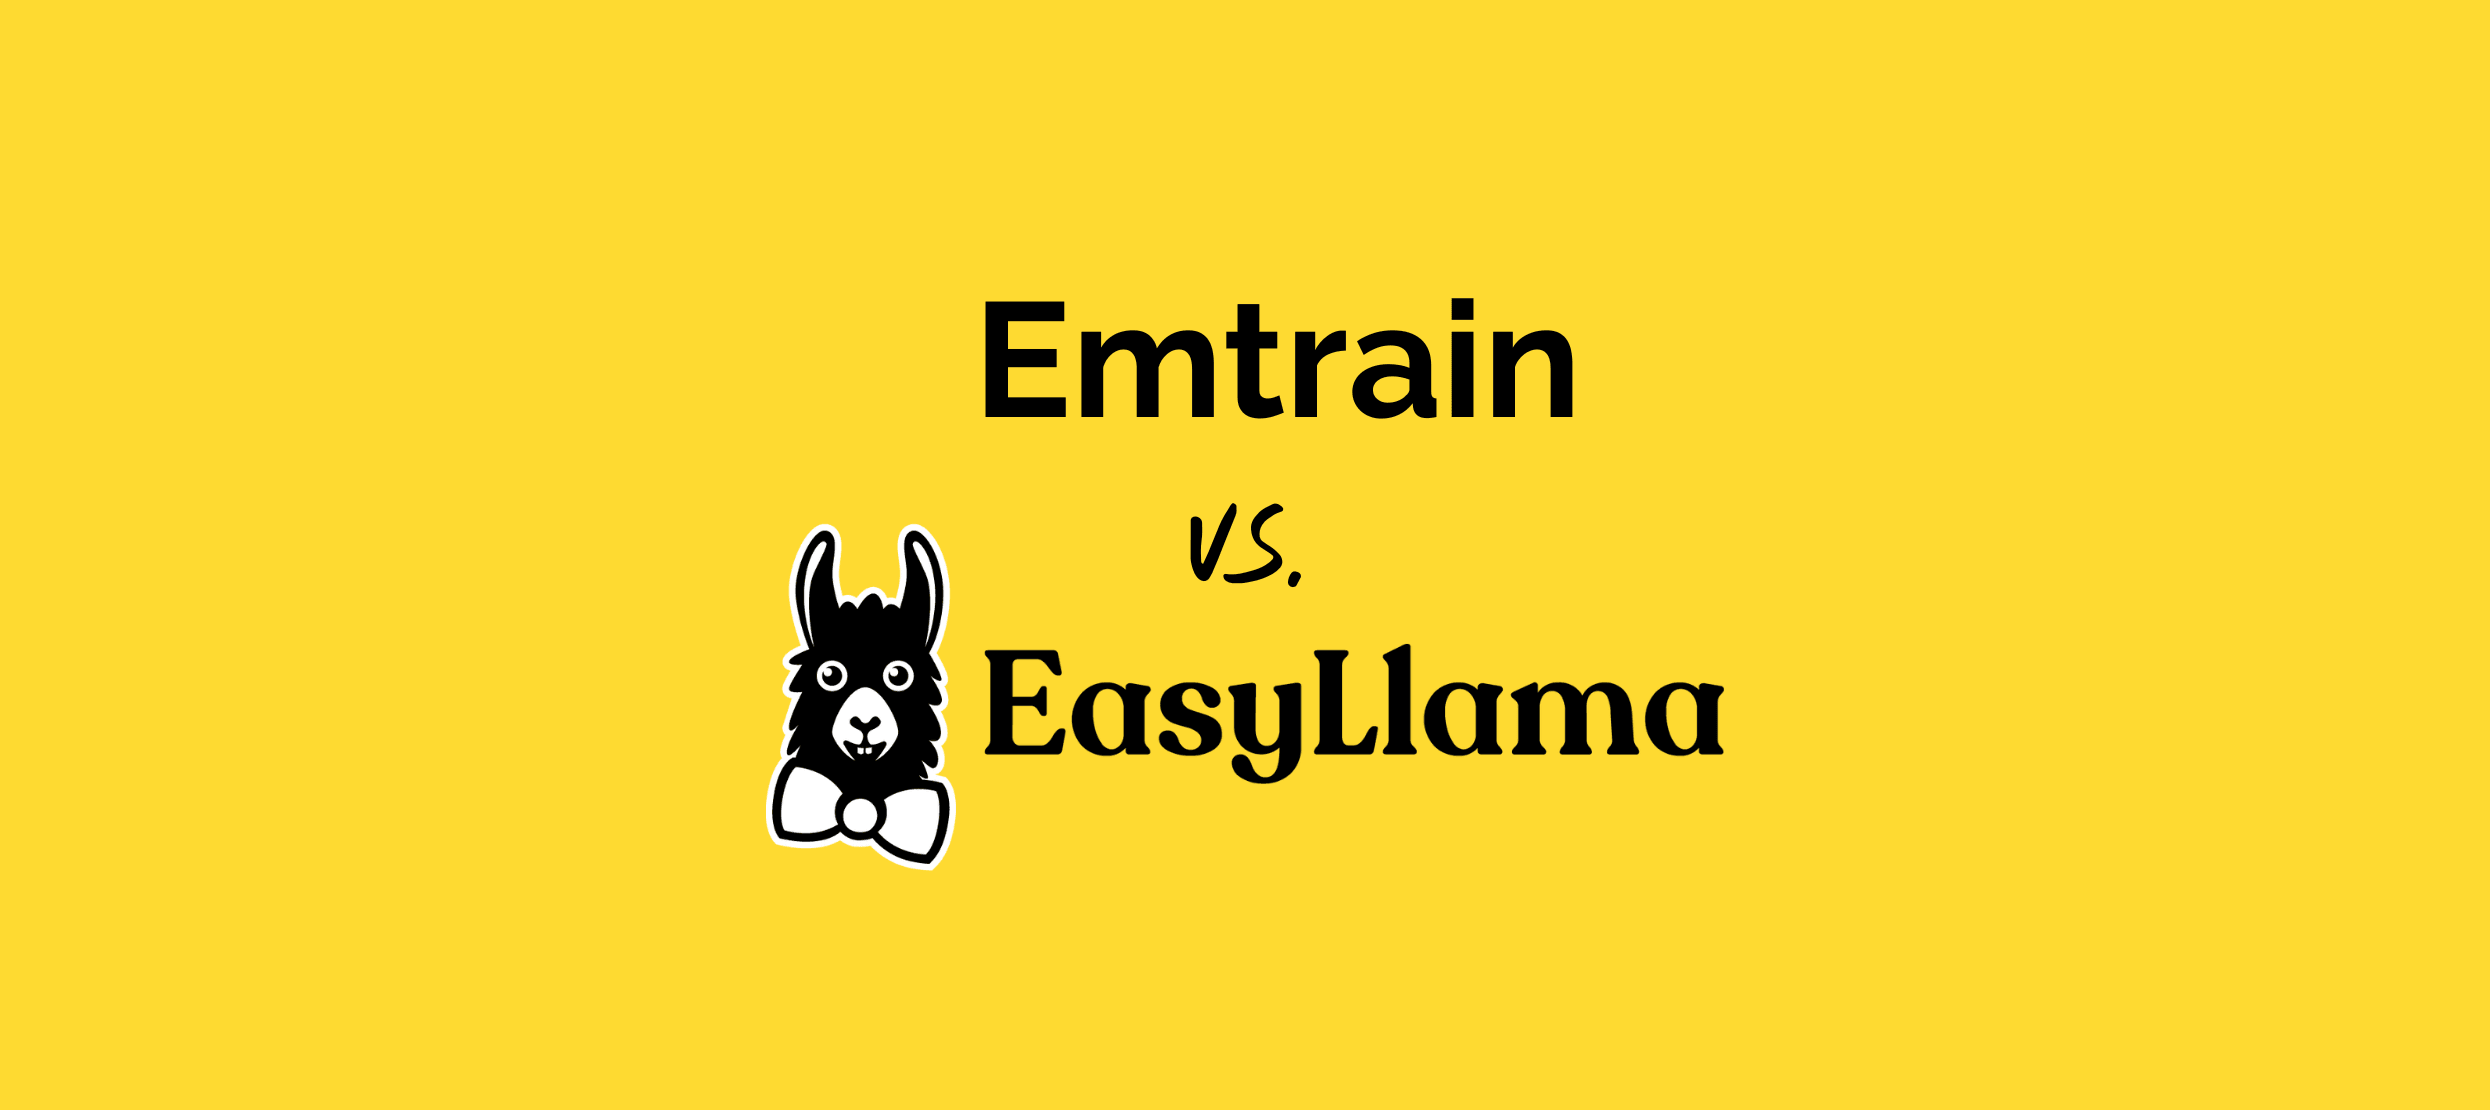 Making the Right Choice for Compliance Training: Emtrain vs. EasyLlama